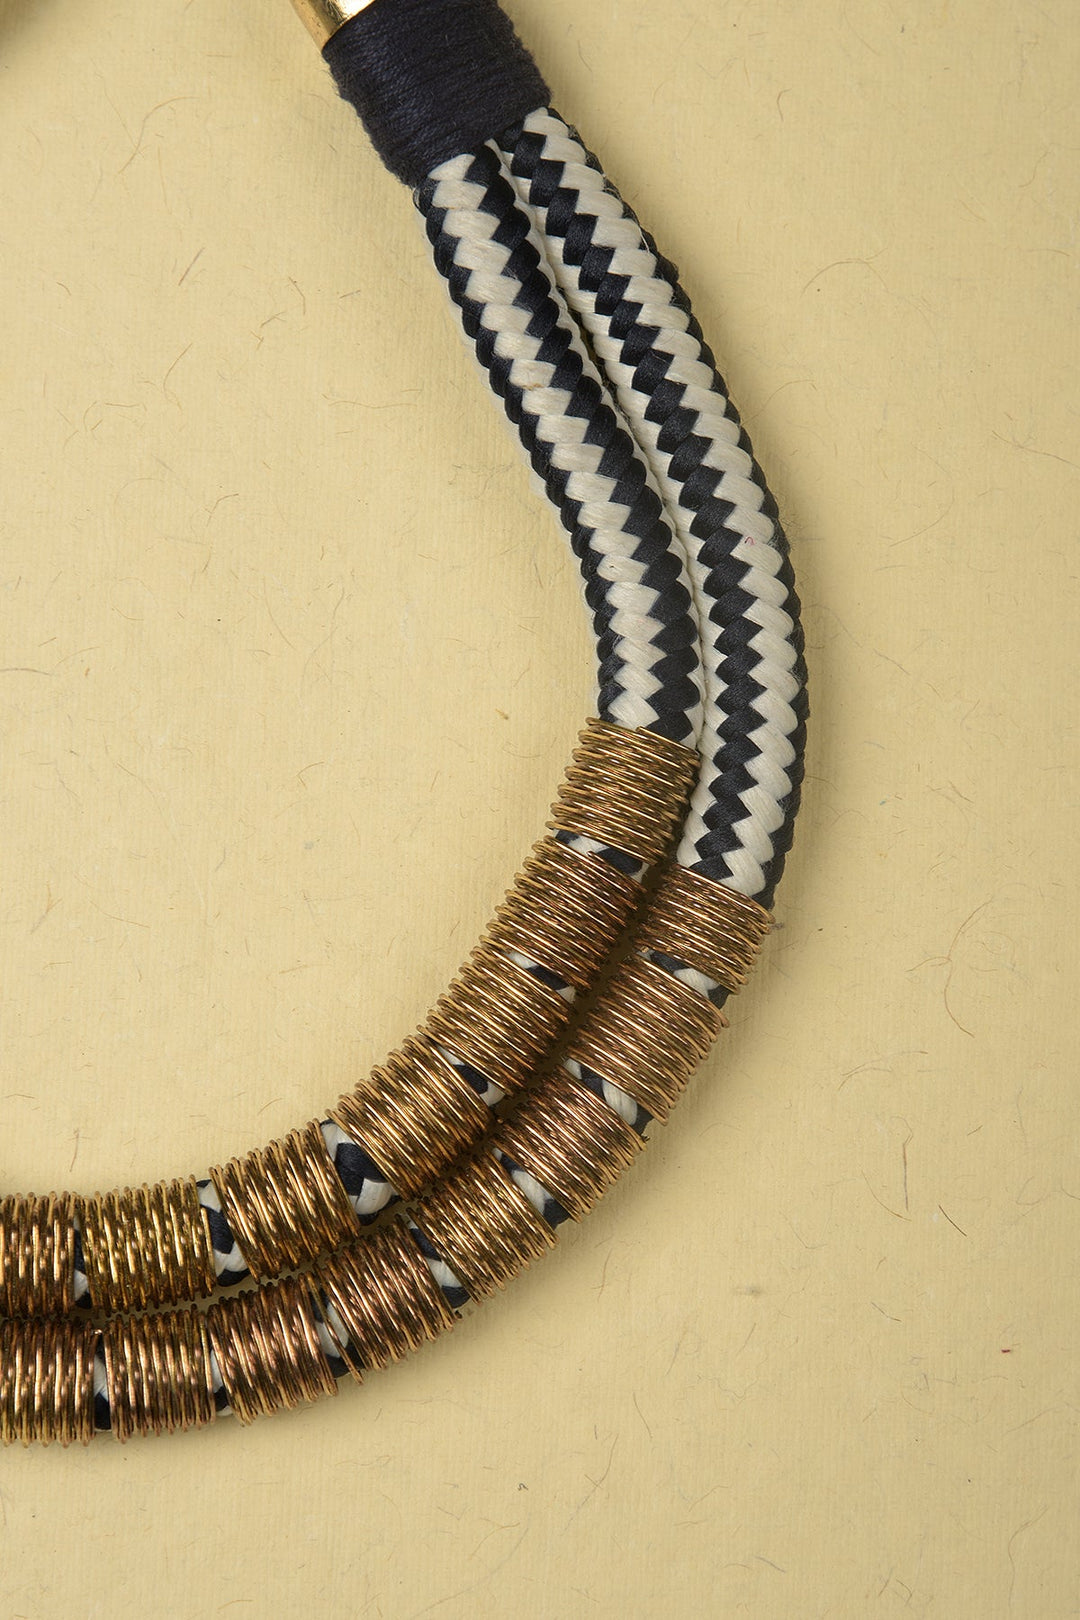 White & Dark Blue Necklace made of Jute, Suede and Plated Iron Rings